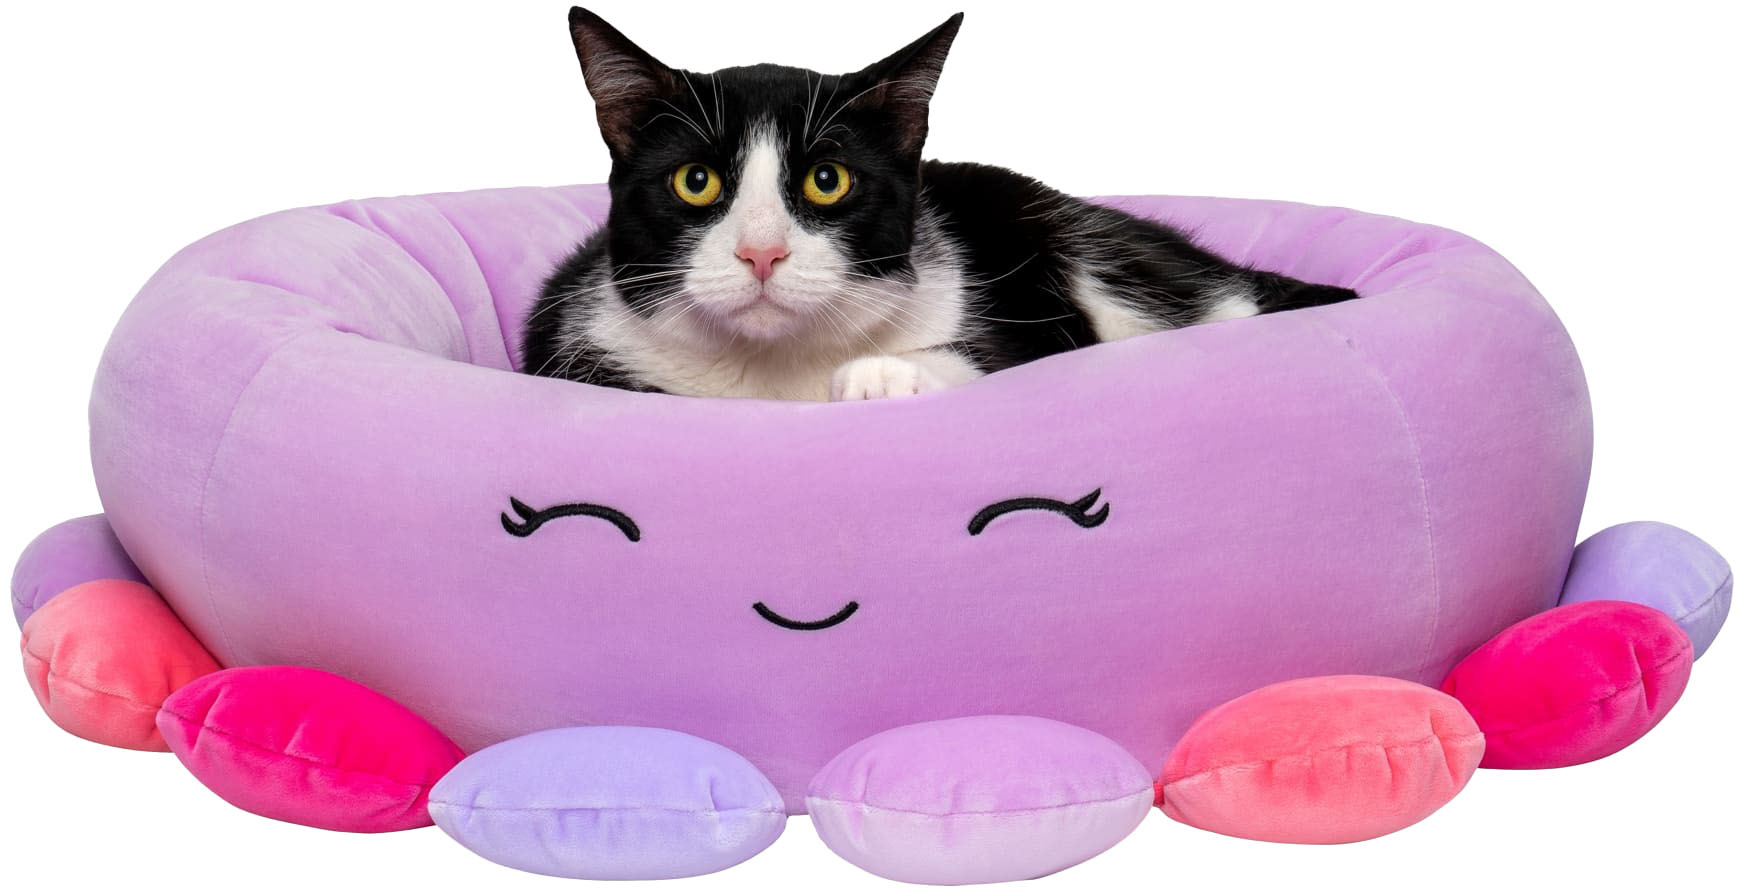 Squishmallows Pet Bed Beula the Octopus - Feeders Pet Supply